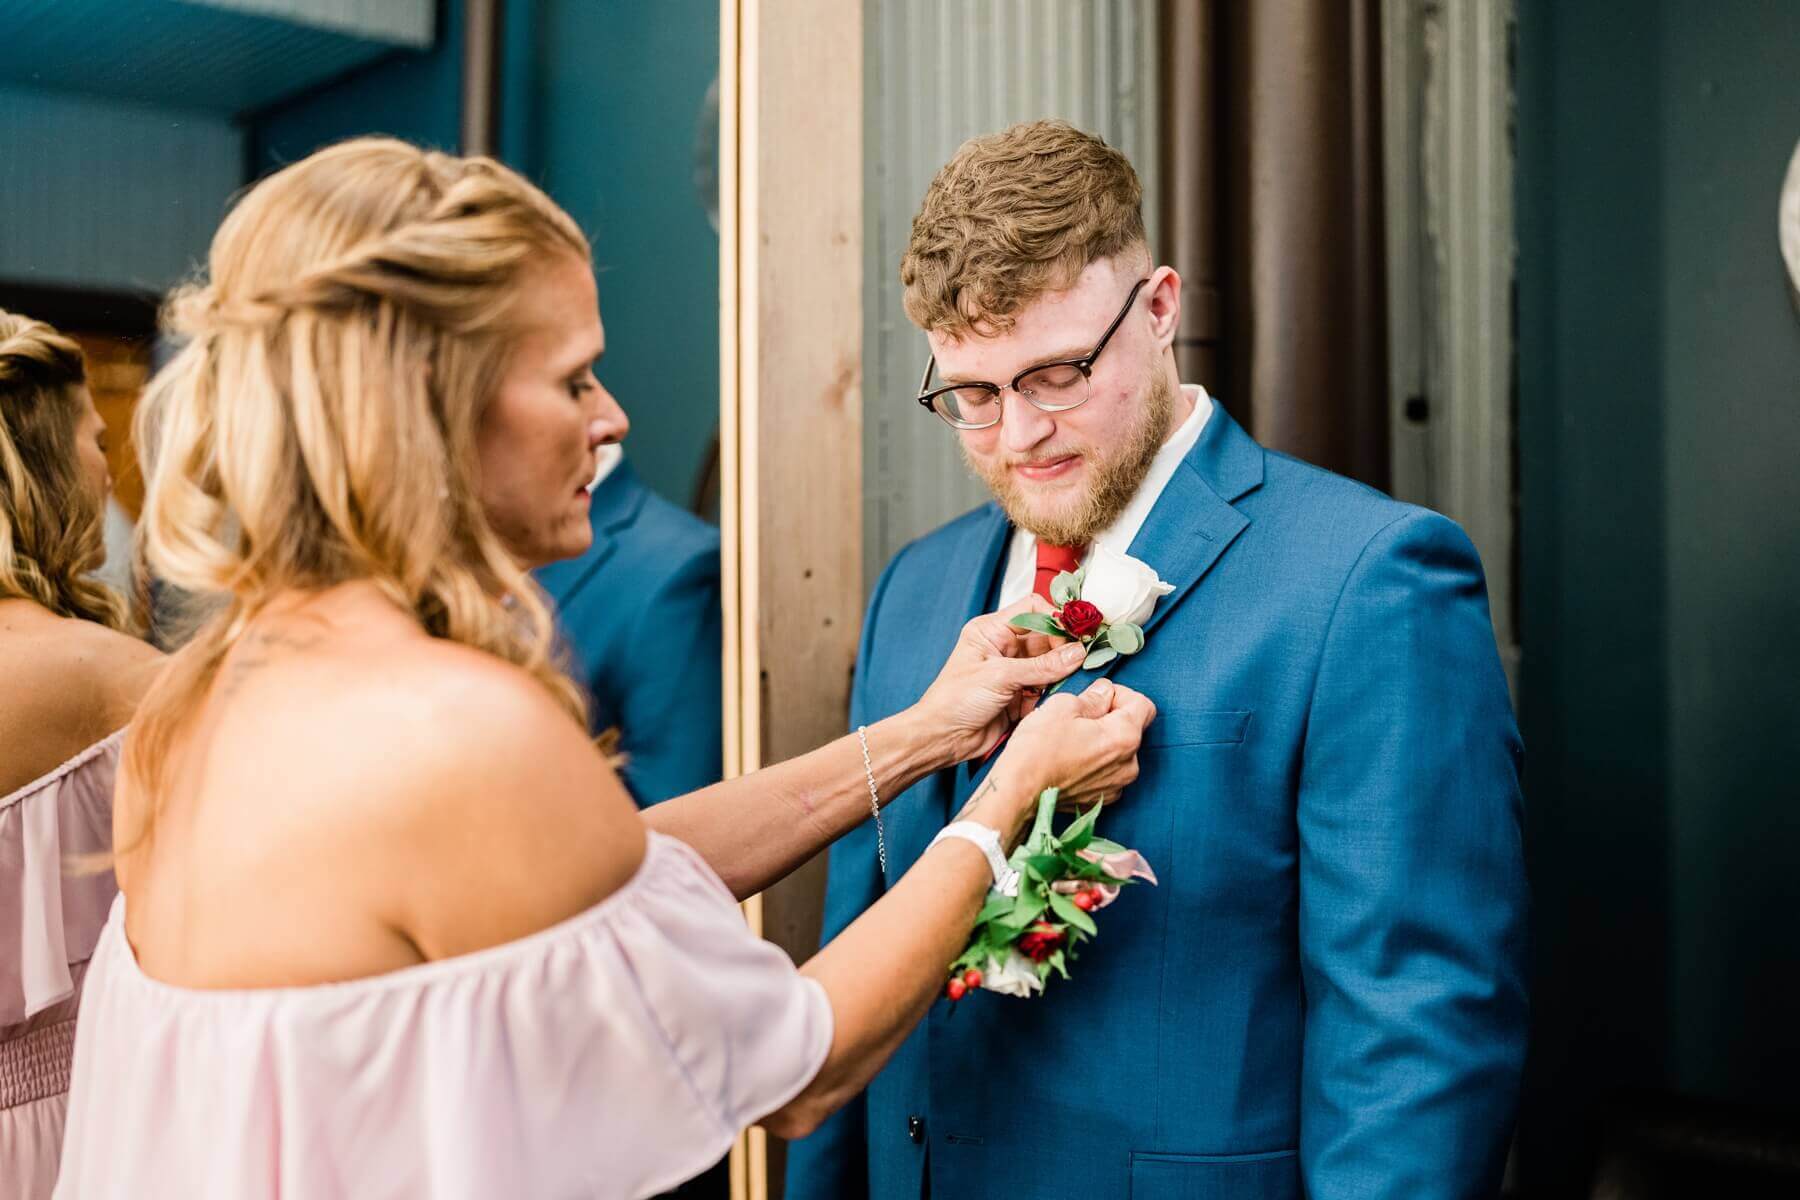 Mother of groom helping groom with his boutonniere